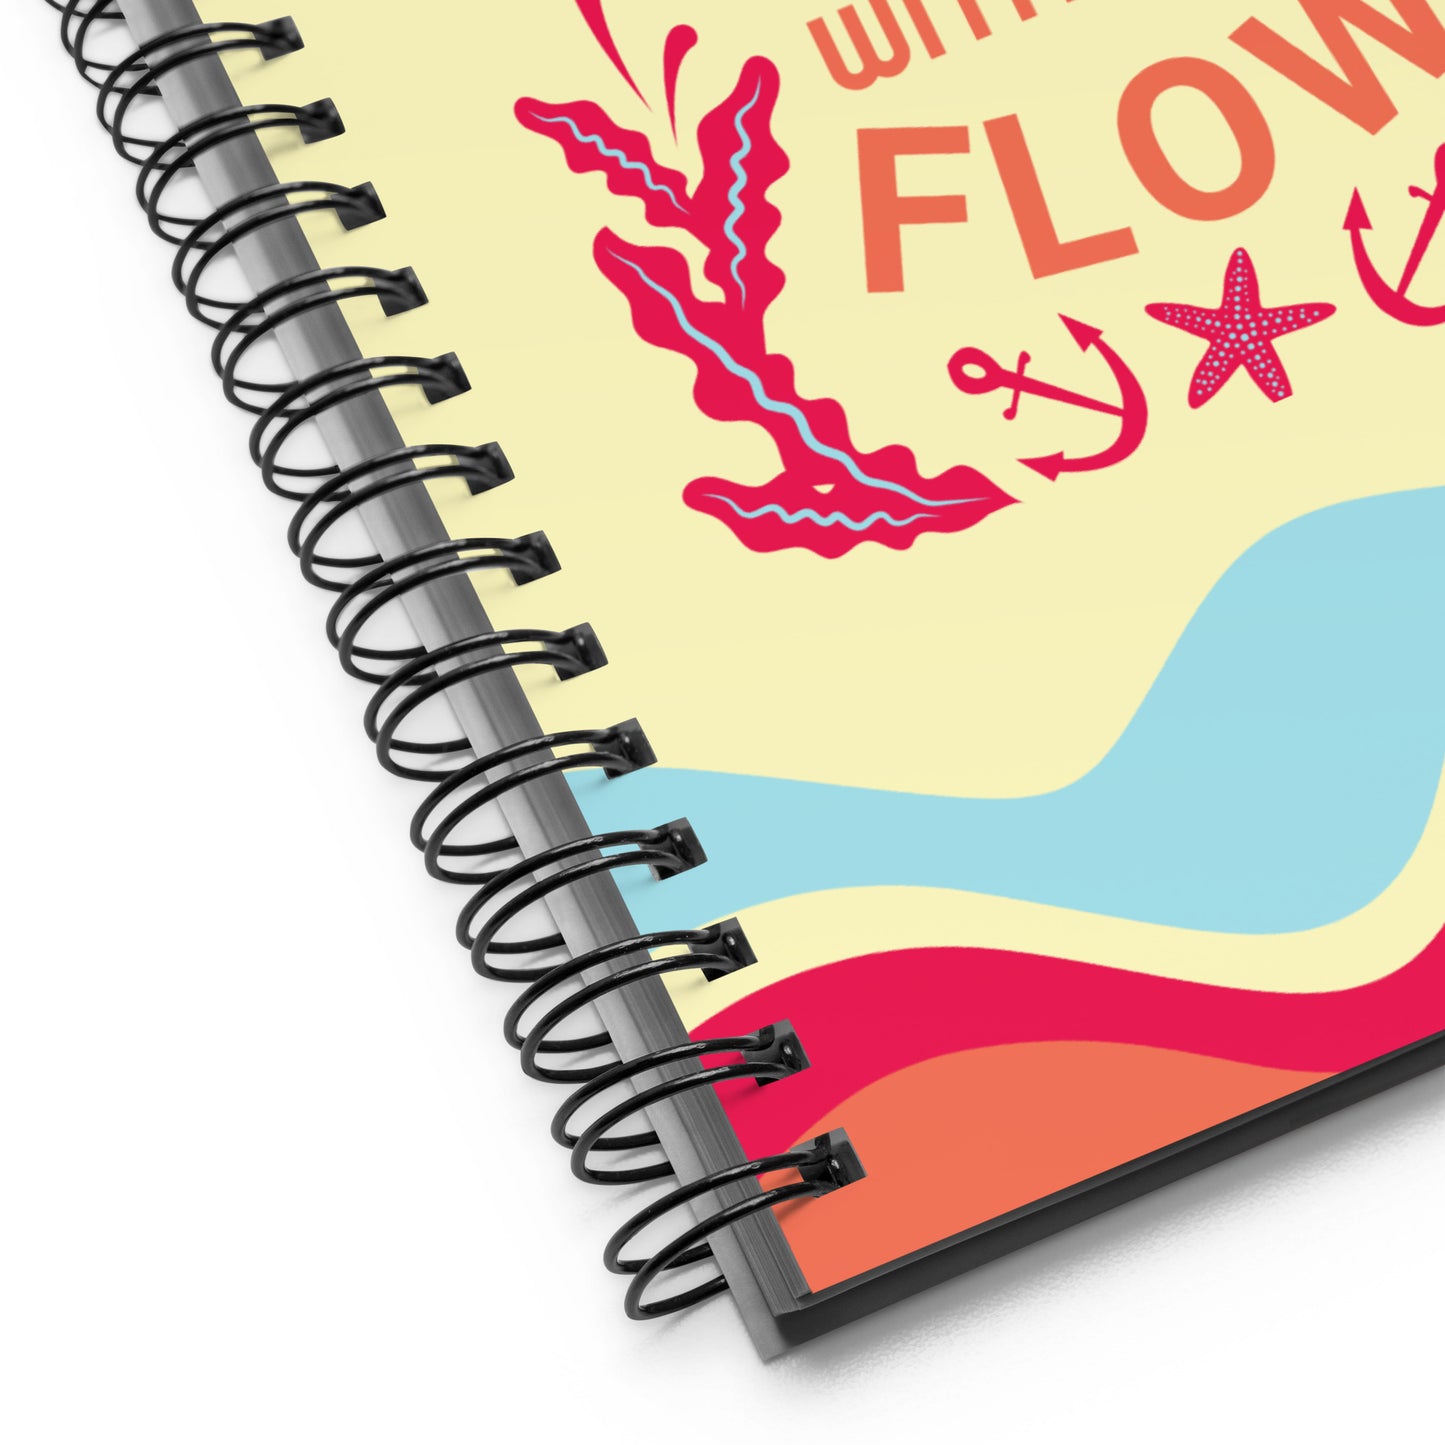 "Go With The Flow" | Spiral notebook